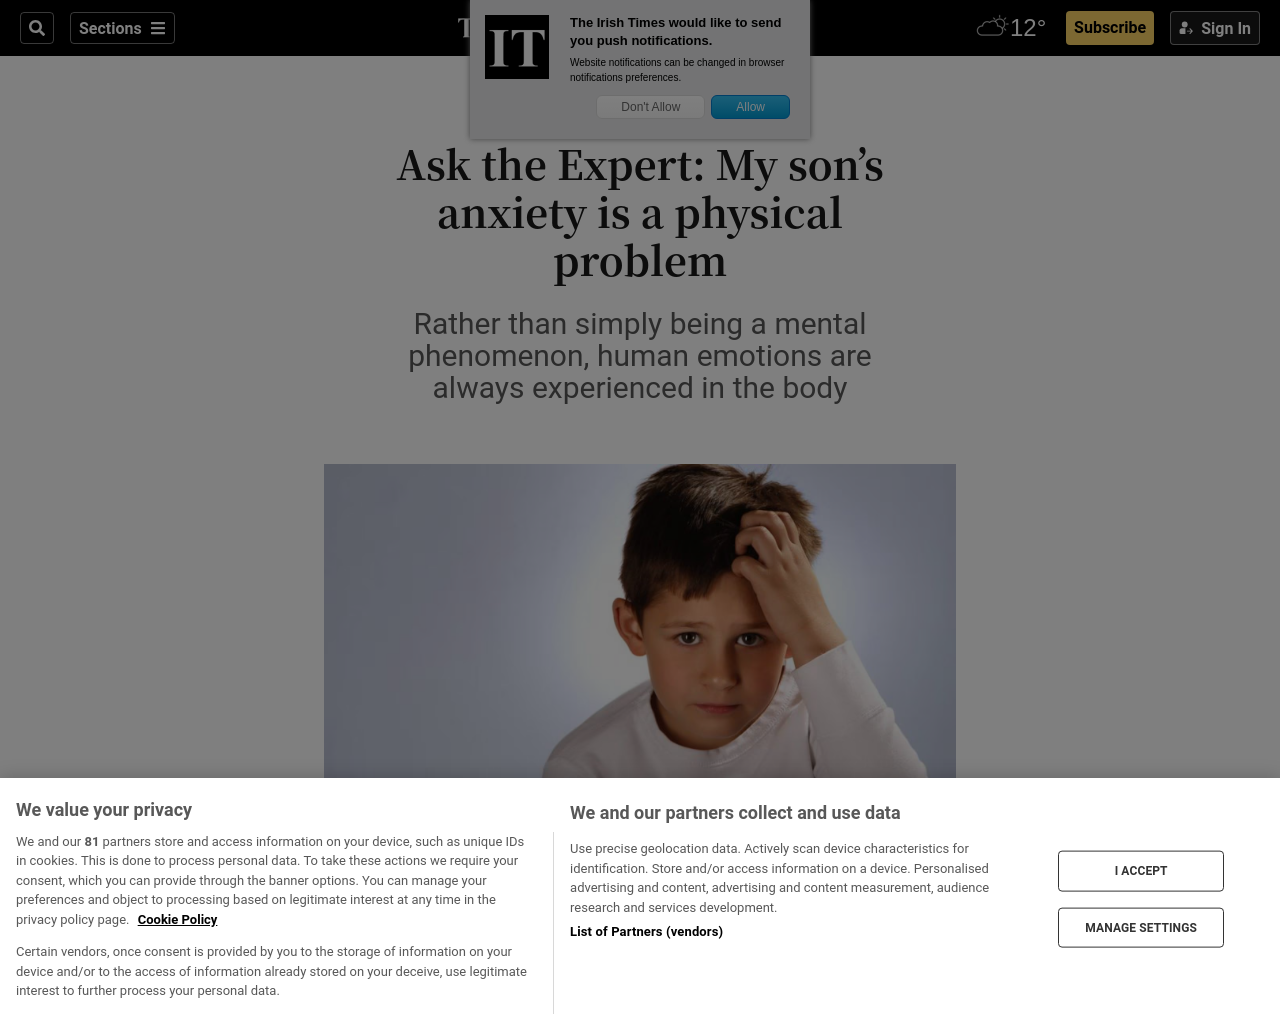 Son's anxiety is a physical problem 